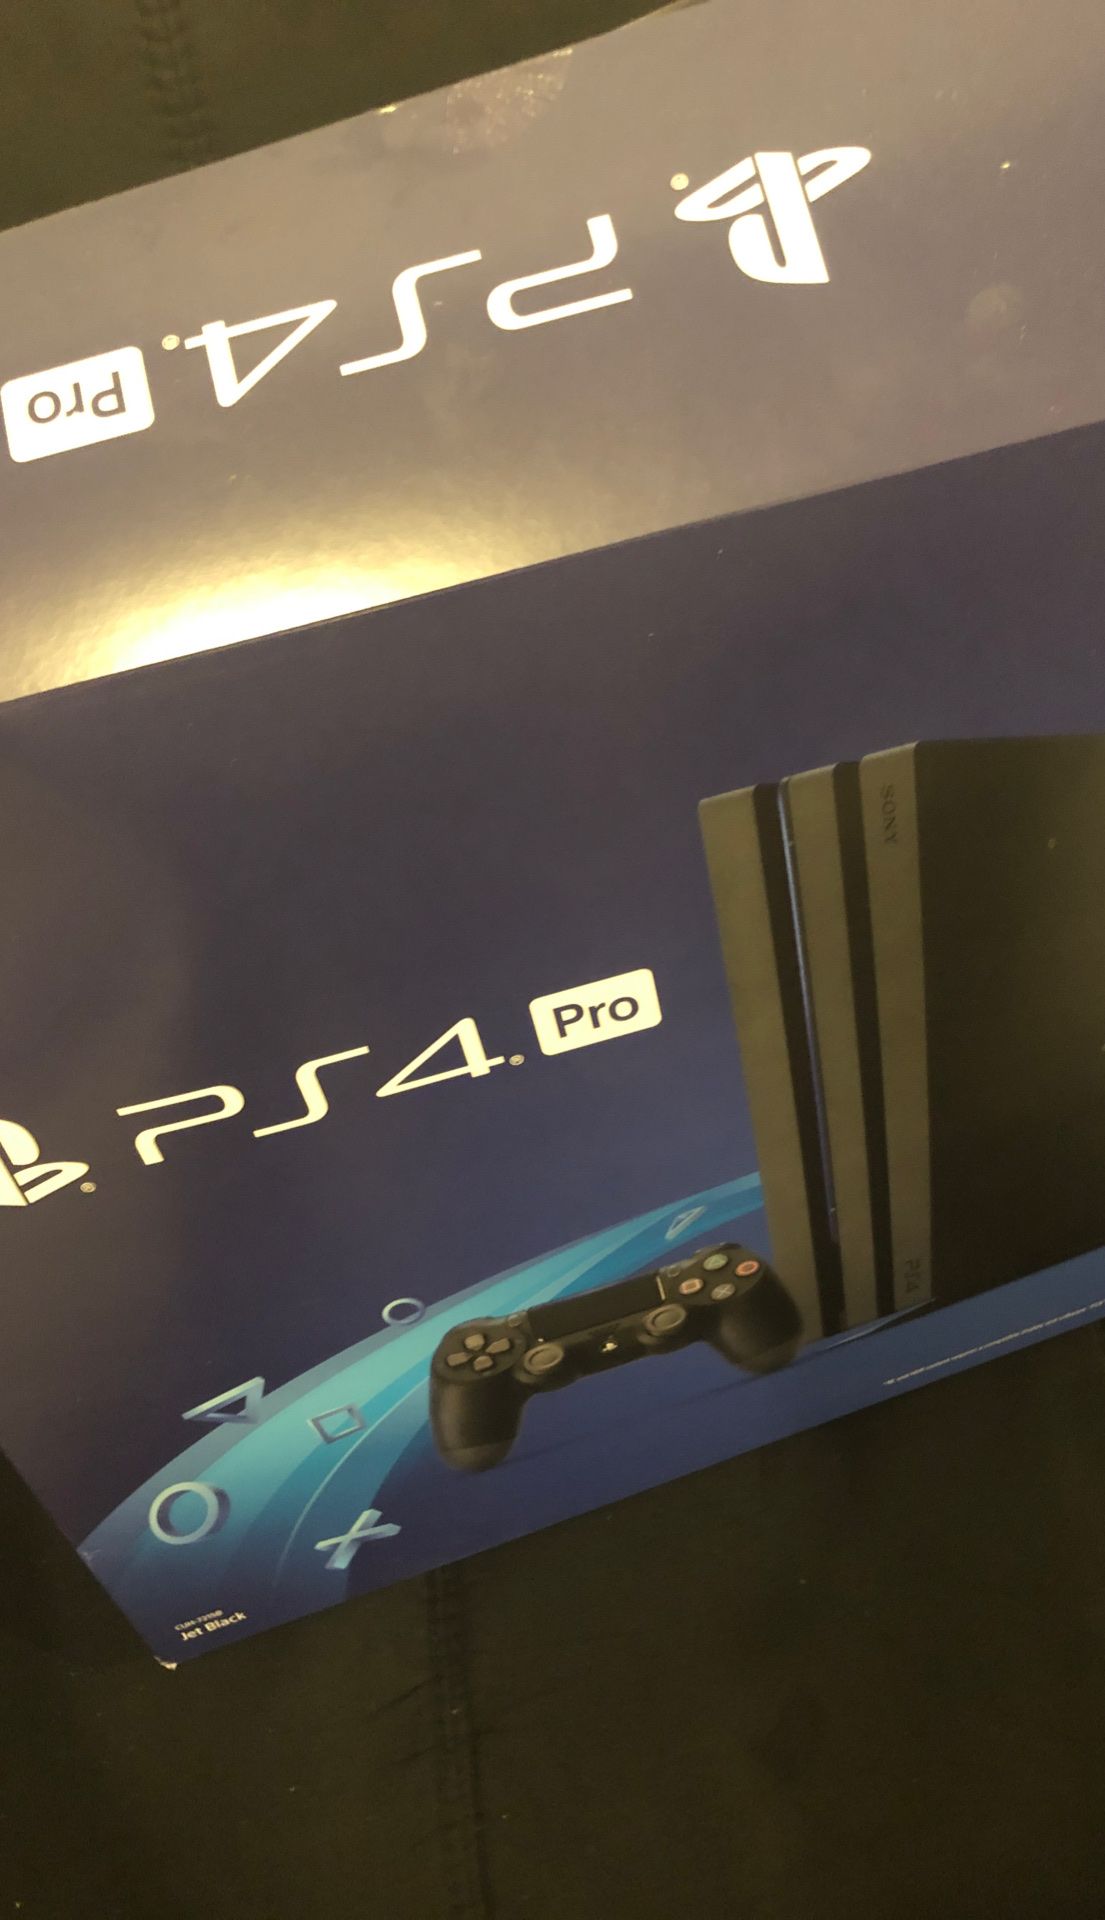 Brand new “Ps4 pro” for only 300